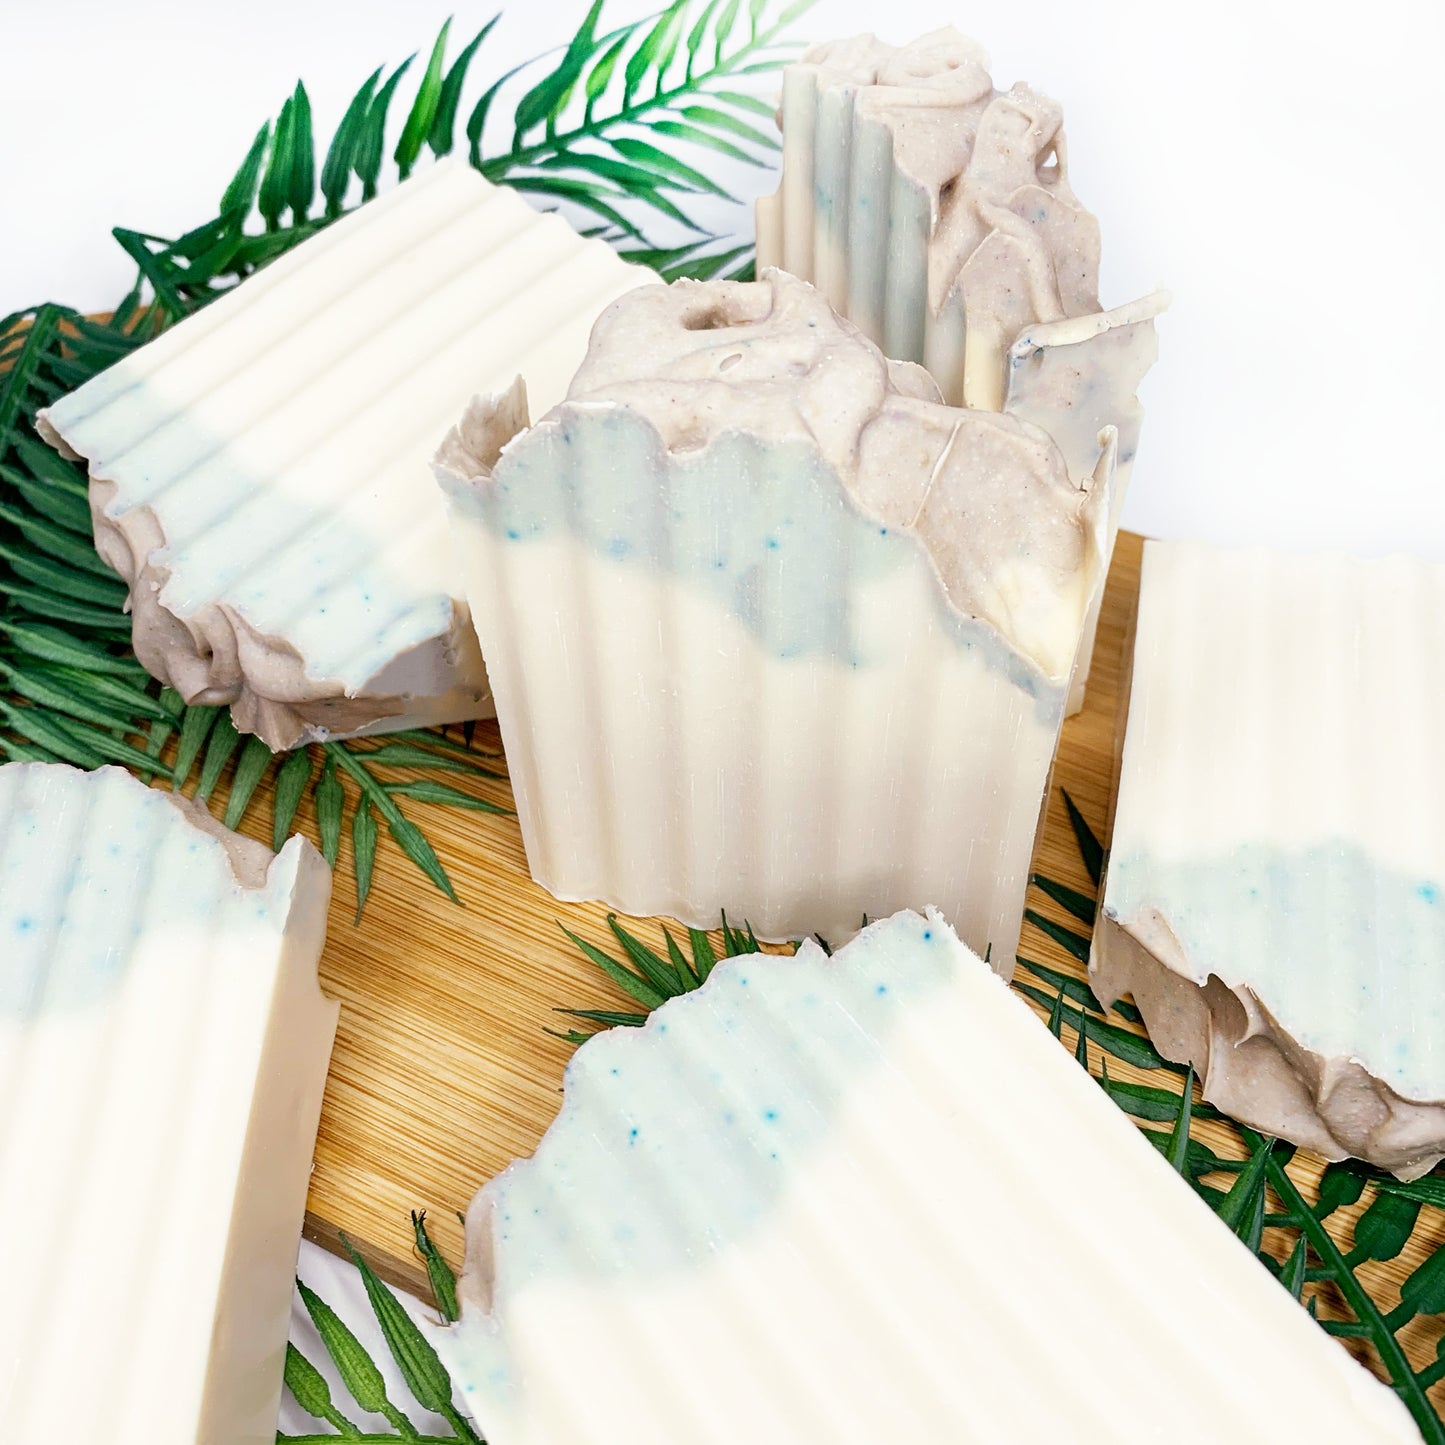 Toasted Coconut Soap